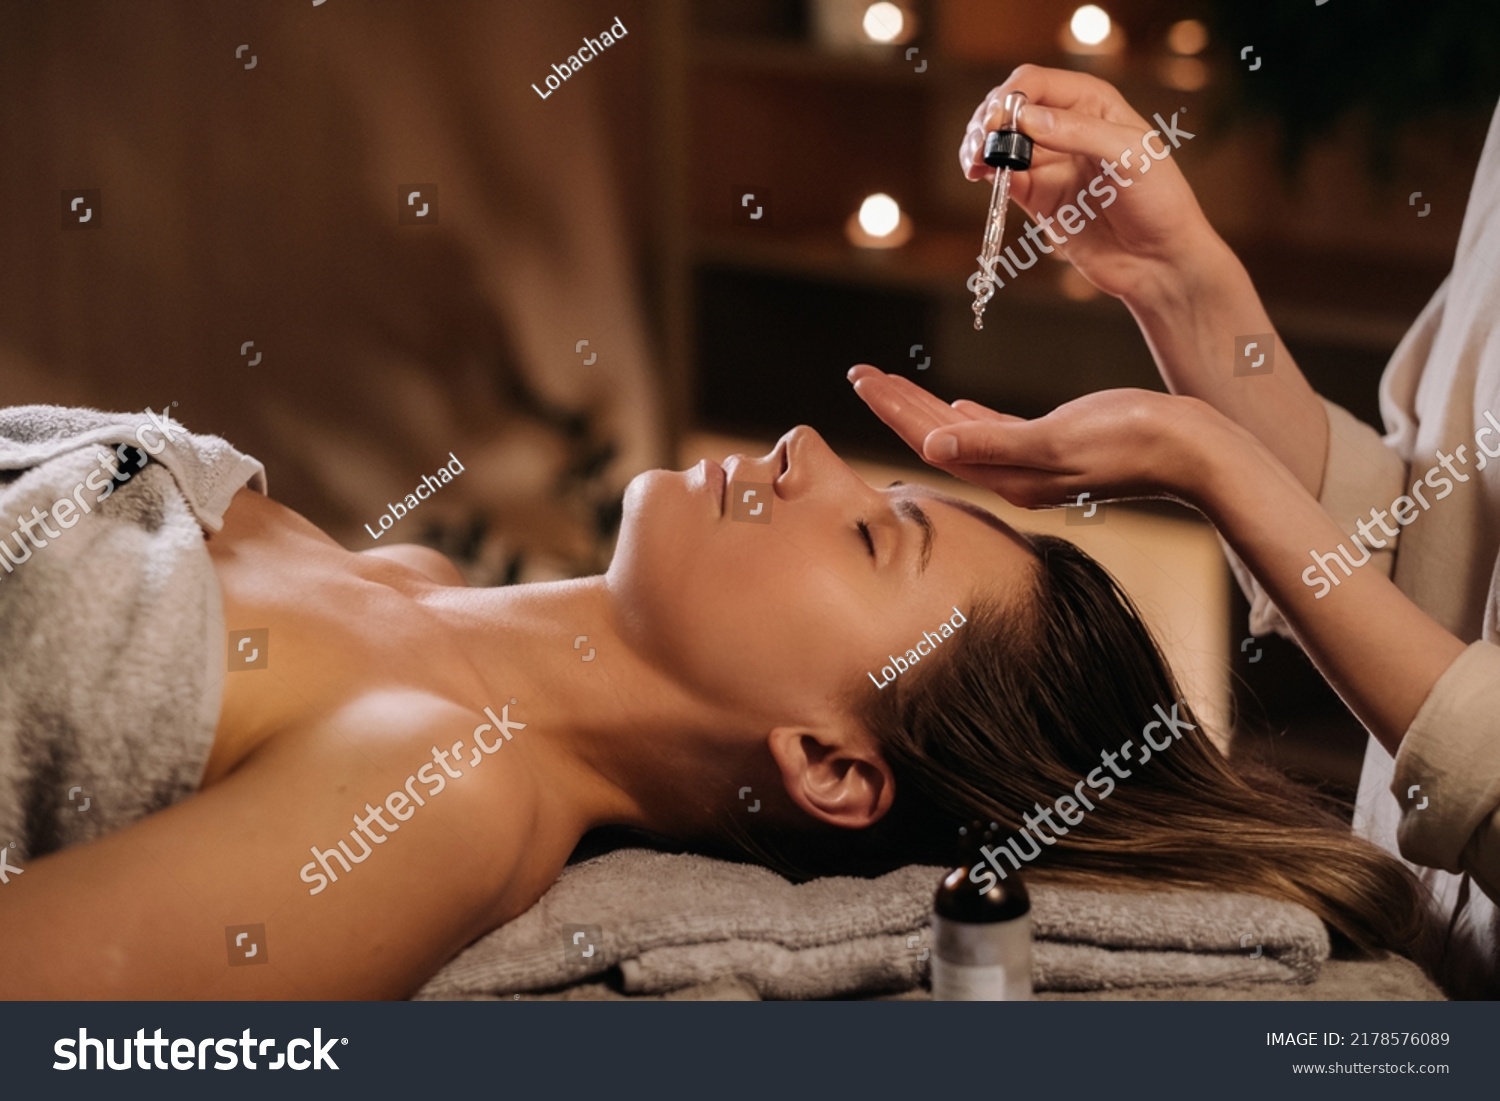 A female cosmetologist holds a pipette with essential oil before aromatherapy and massage to the patient. aromatherapy.Close-up. #2178576089